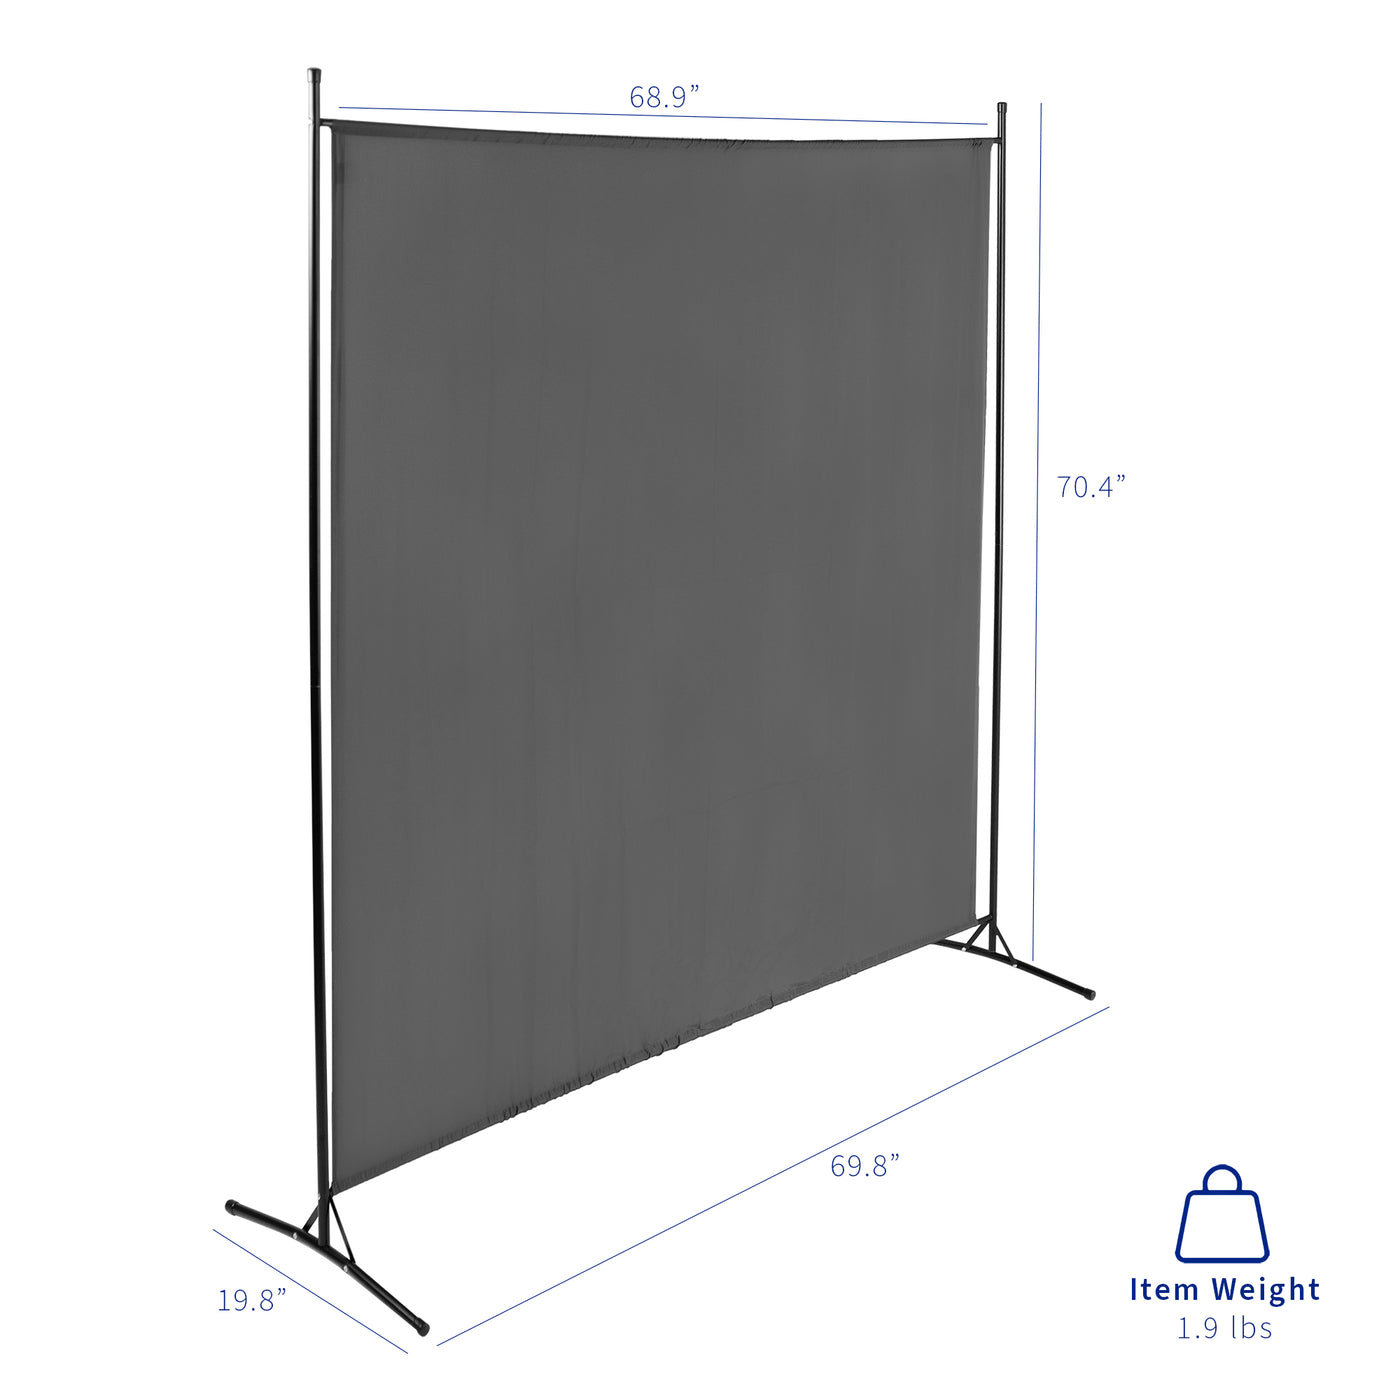 Size and lightweight features of the visual room divider from VIVO.